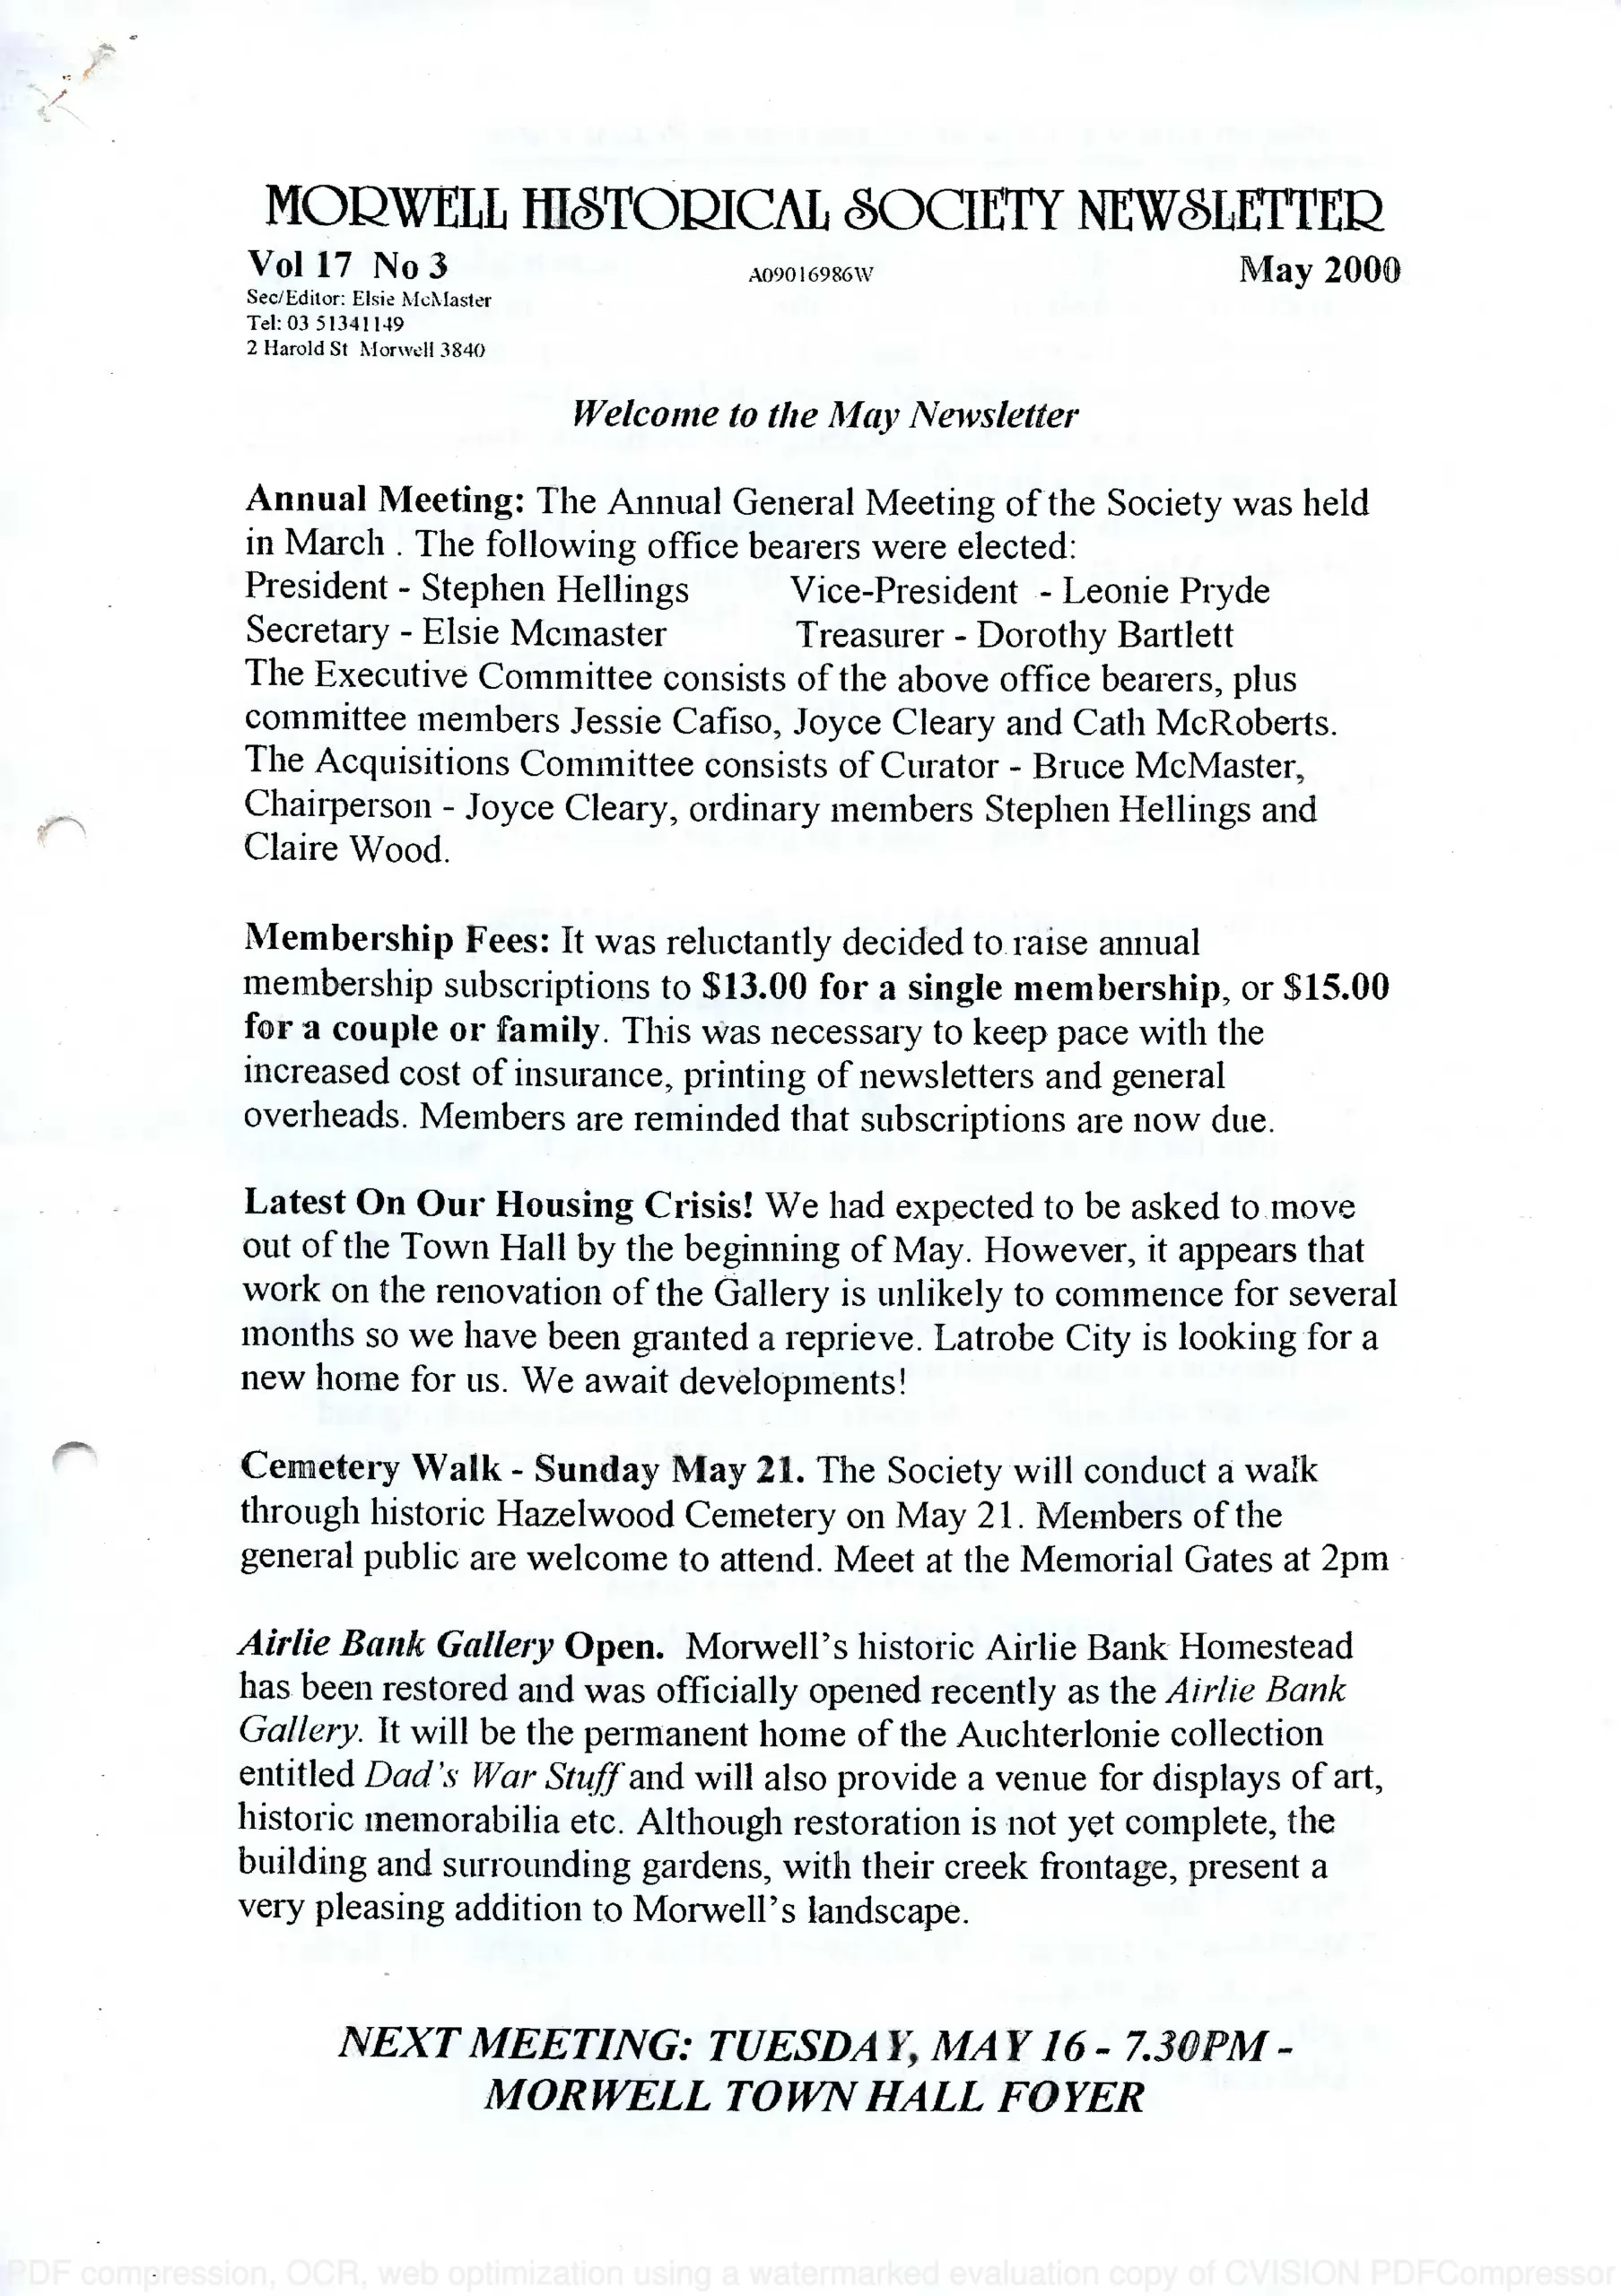 Newsletter May 2000